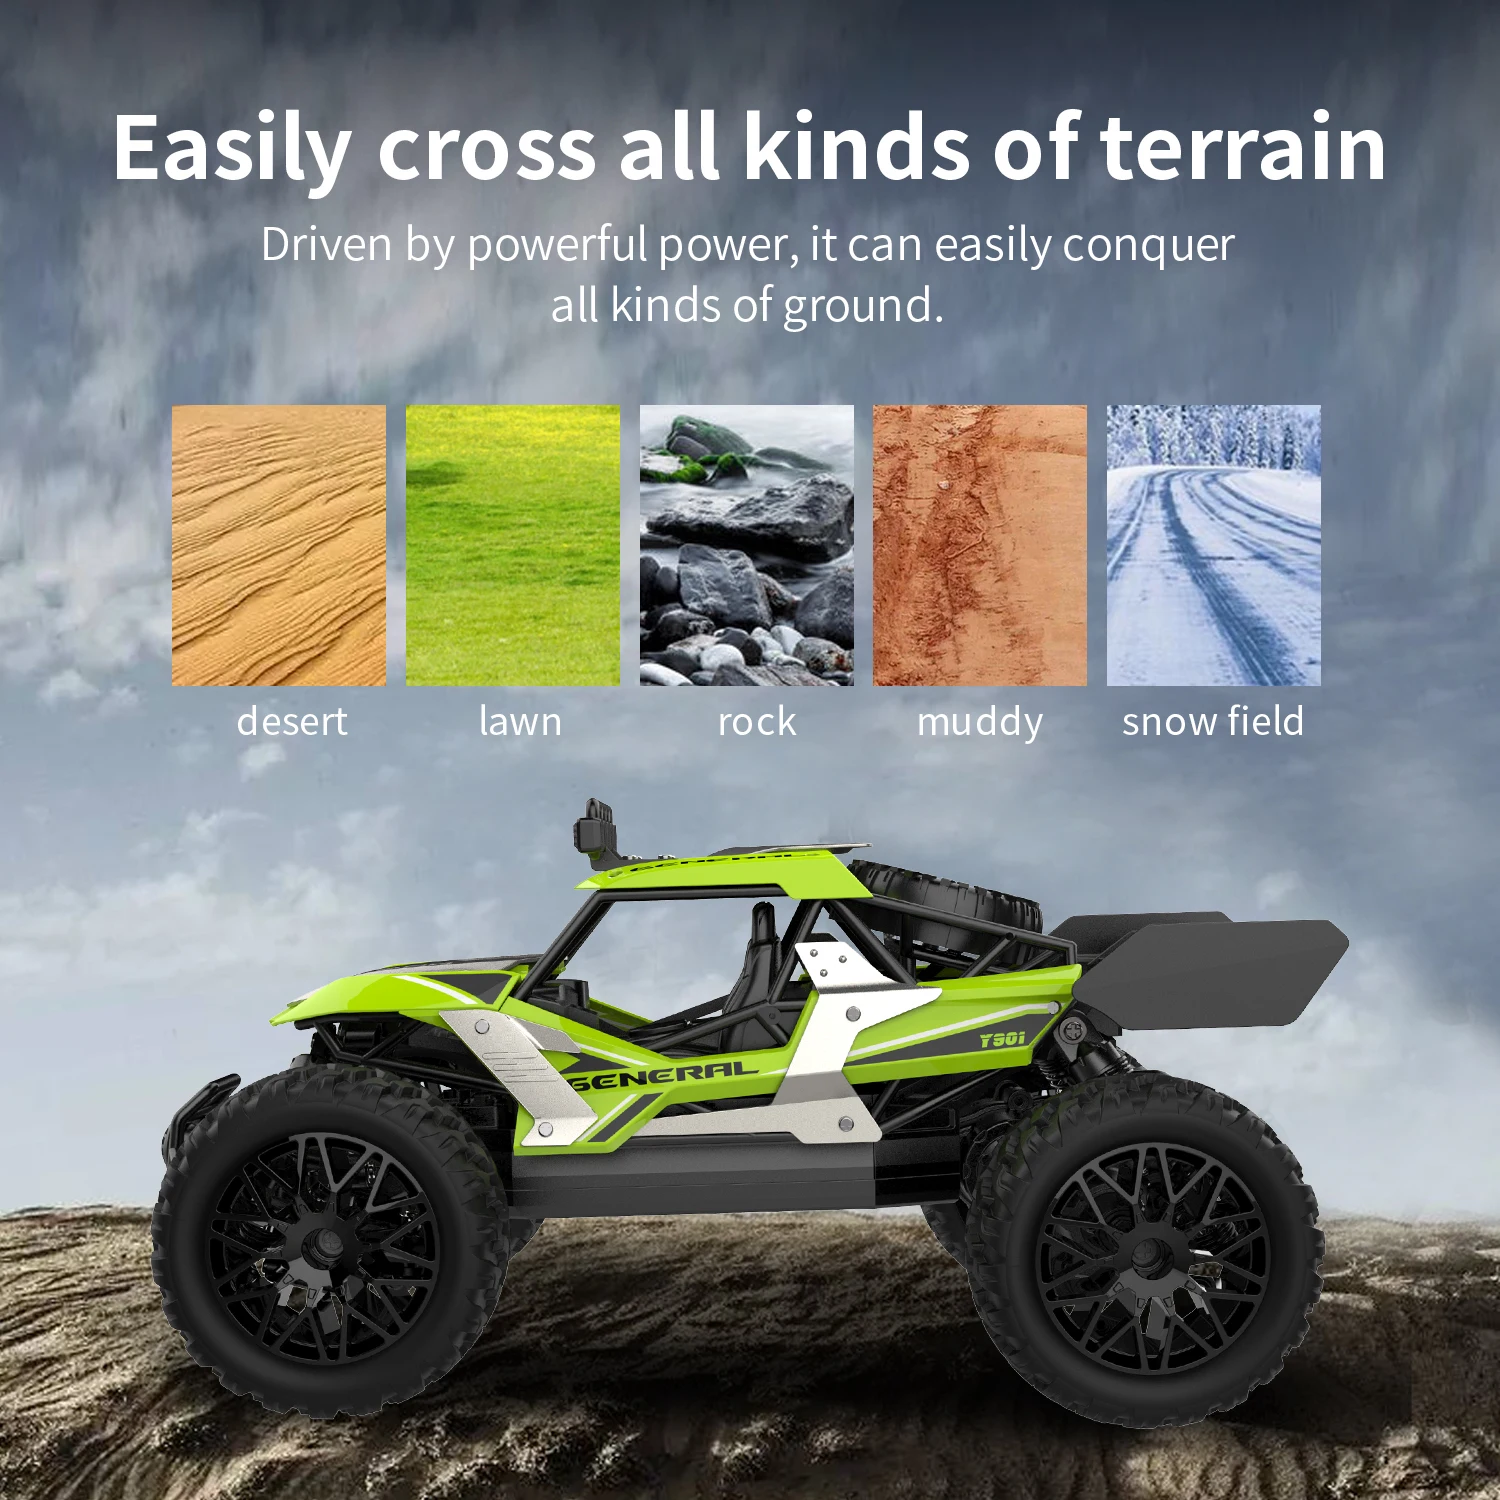 2023 New 1:14 RC Car 25km/h High Speed Off Road Vehicle, 2.4G 4WD Climbing King Alloy Remote Control Car Toy for Boys kids gift enlarge